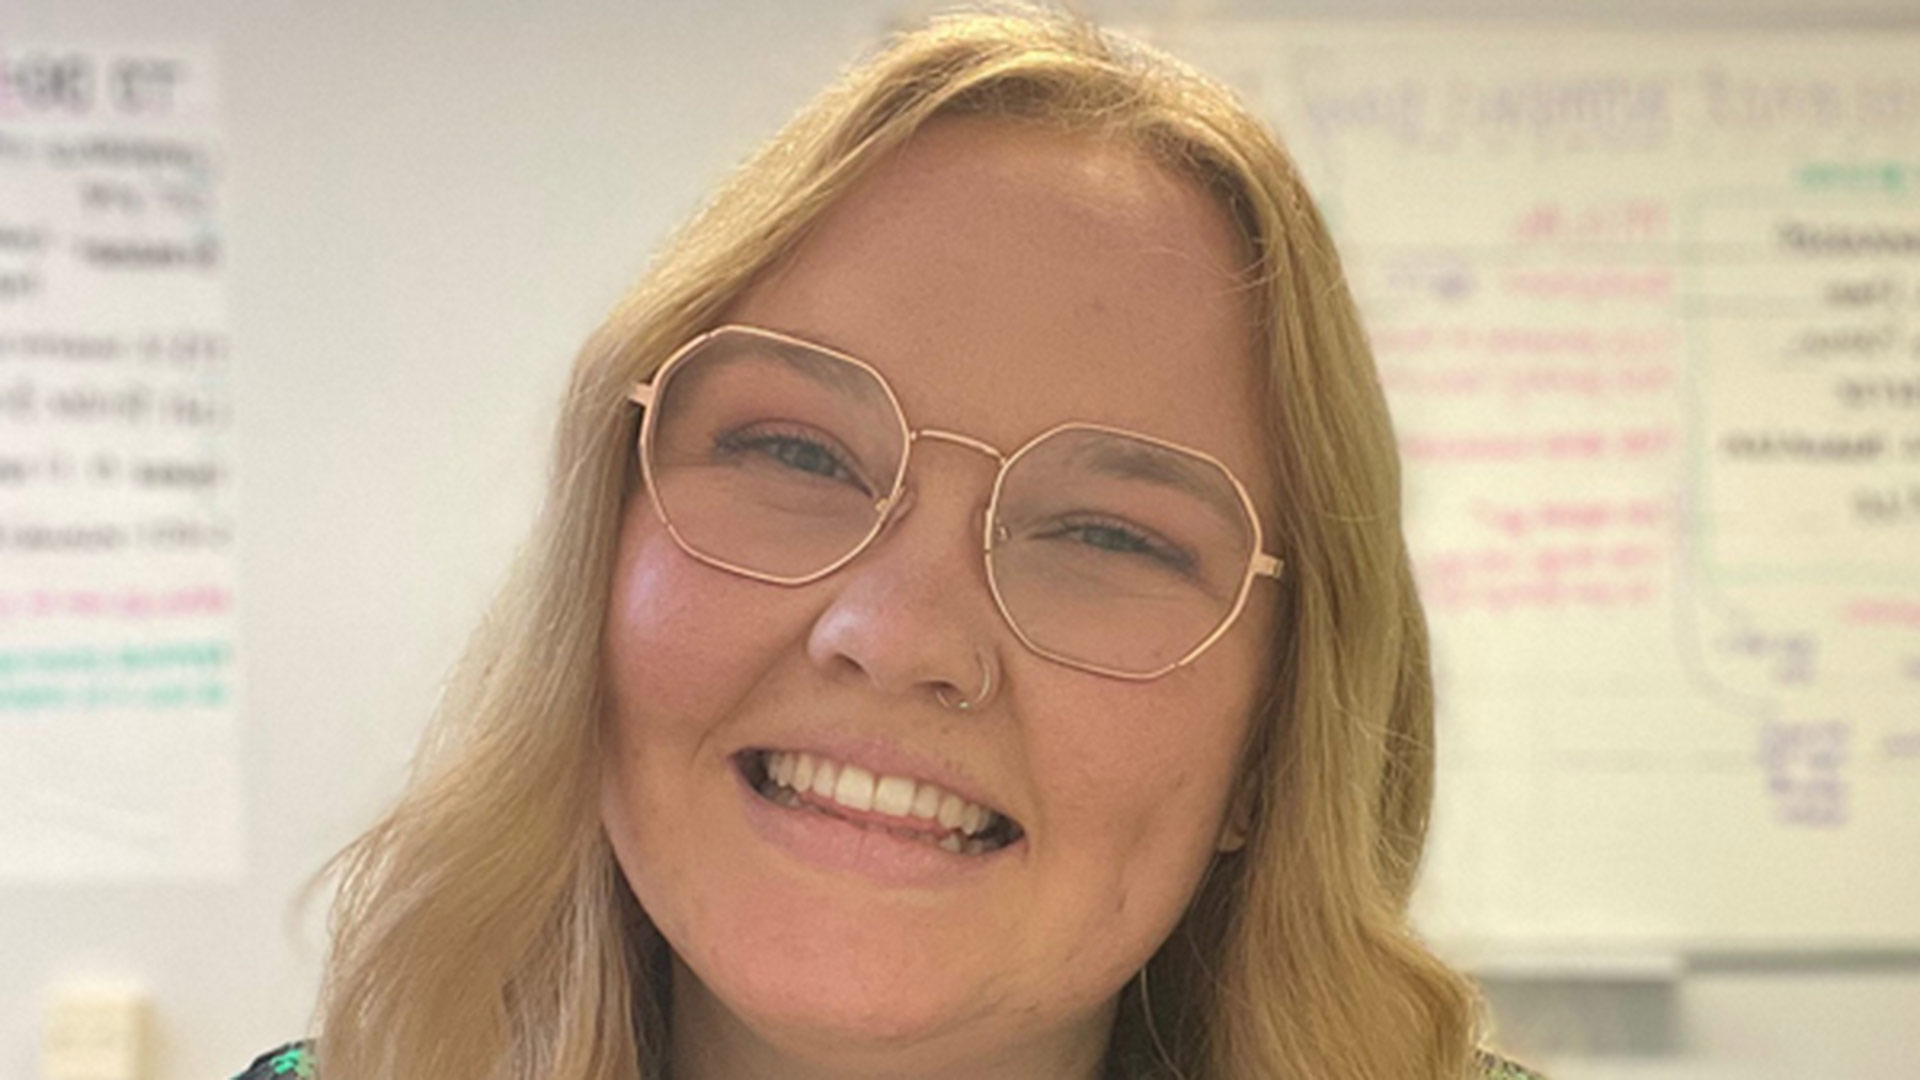 A blond woman wearing glasses smiles in front of a whiteboard.